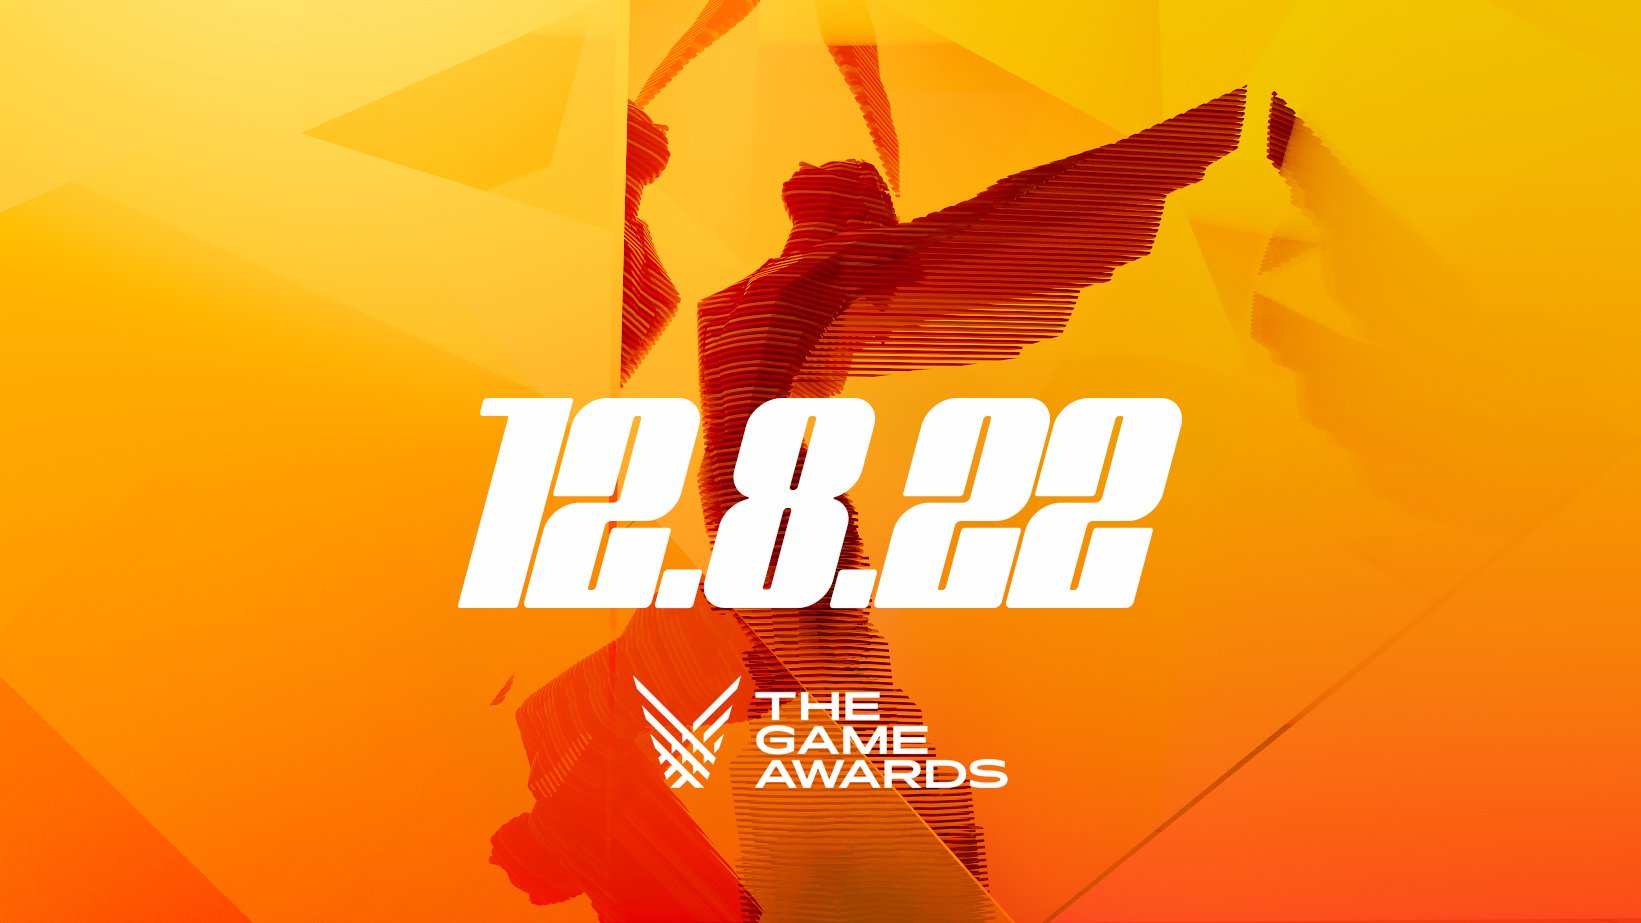 The Game Awards on X: 🗓️ MARK YOUR CALENDAR 🗓️ THE GAME AWARDS Live  December 8, 2022 Join us to celebrate the best video games of 2022 and see  what's next. @TheGameAwards